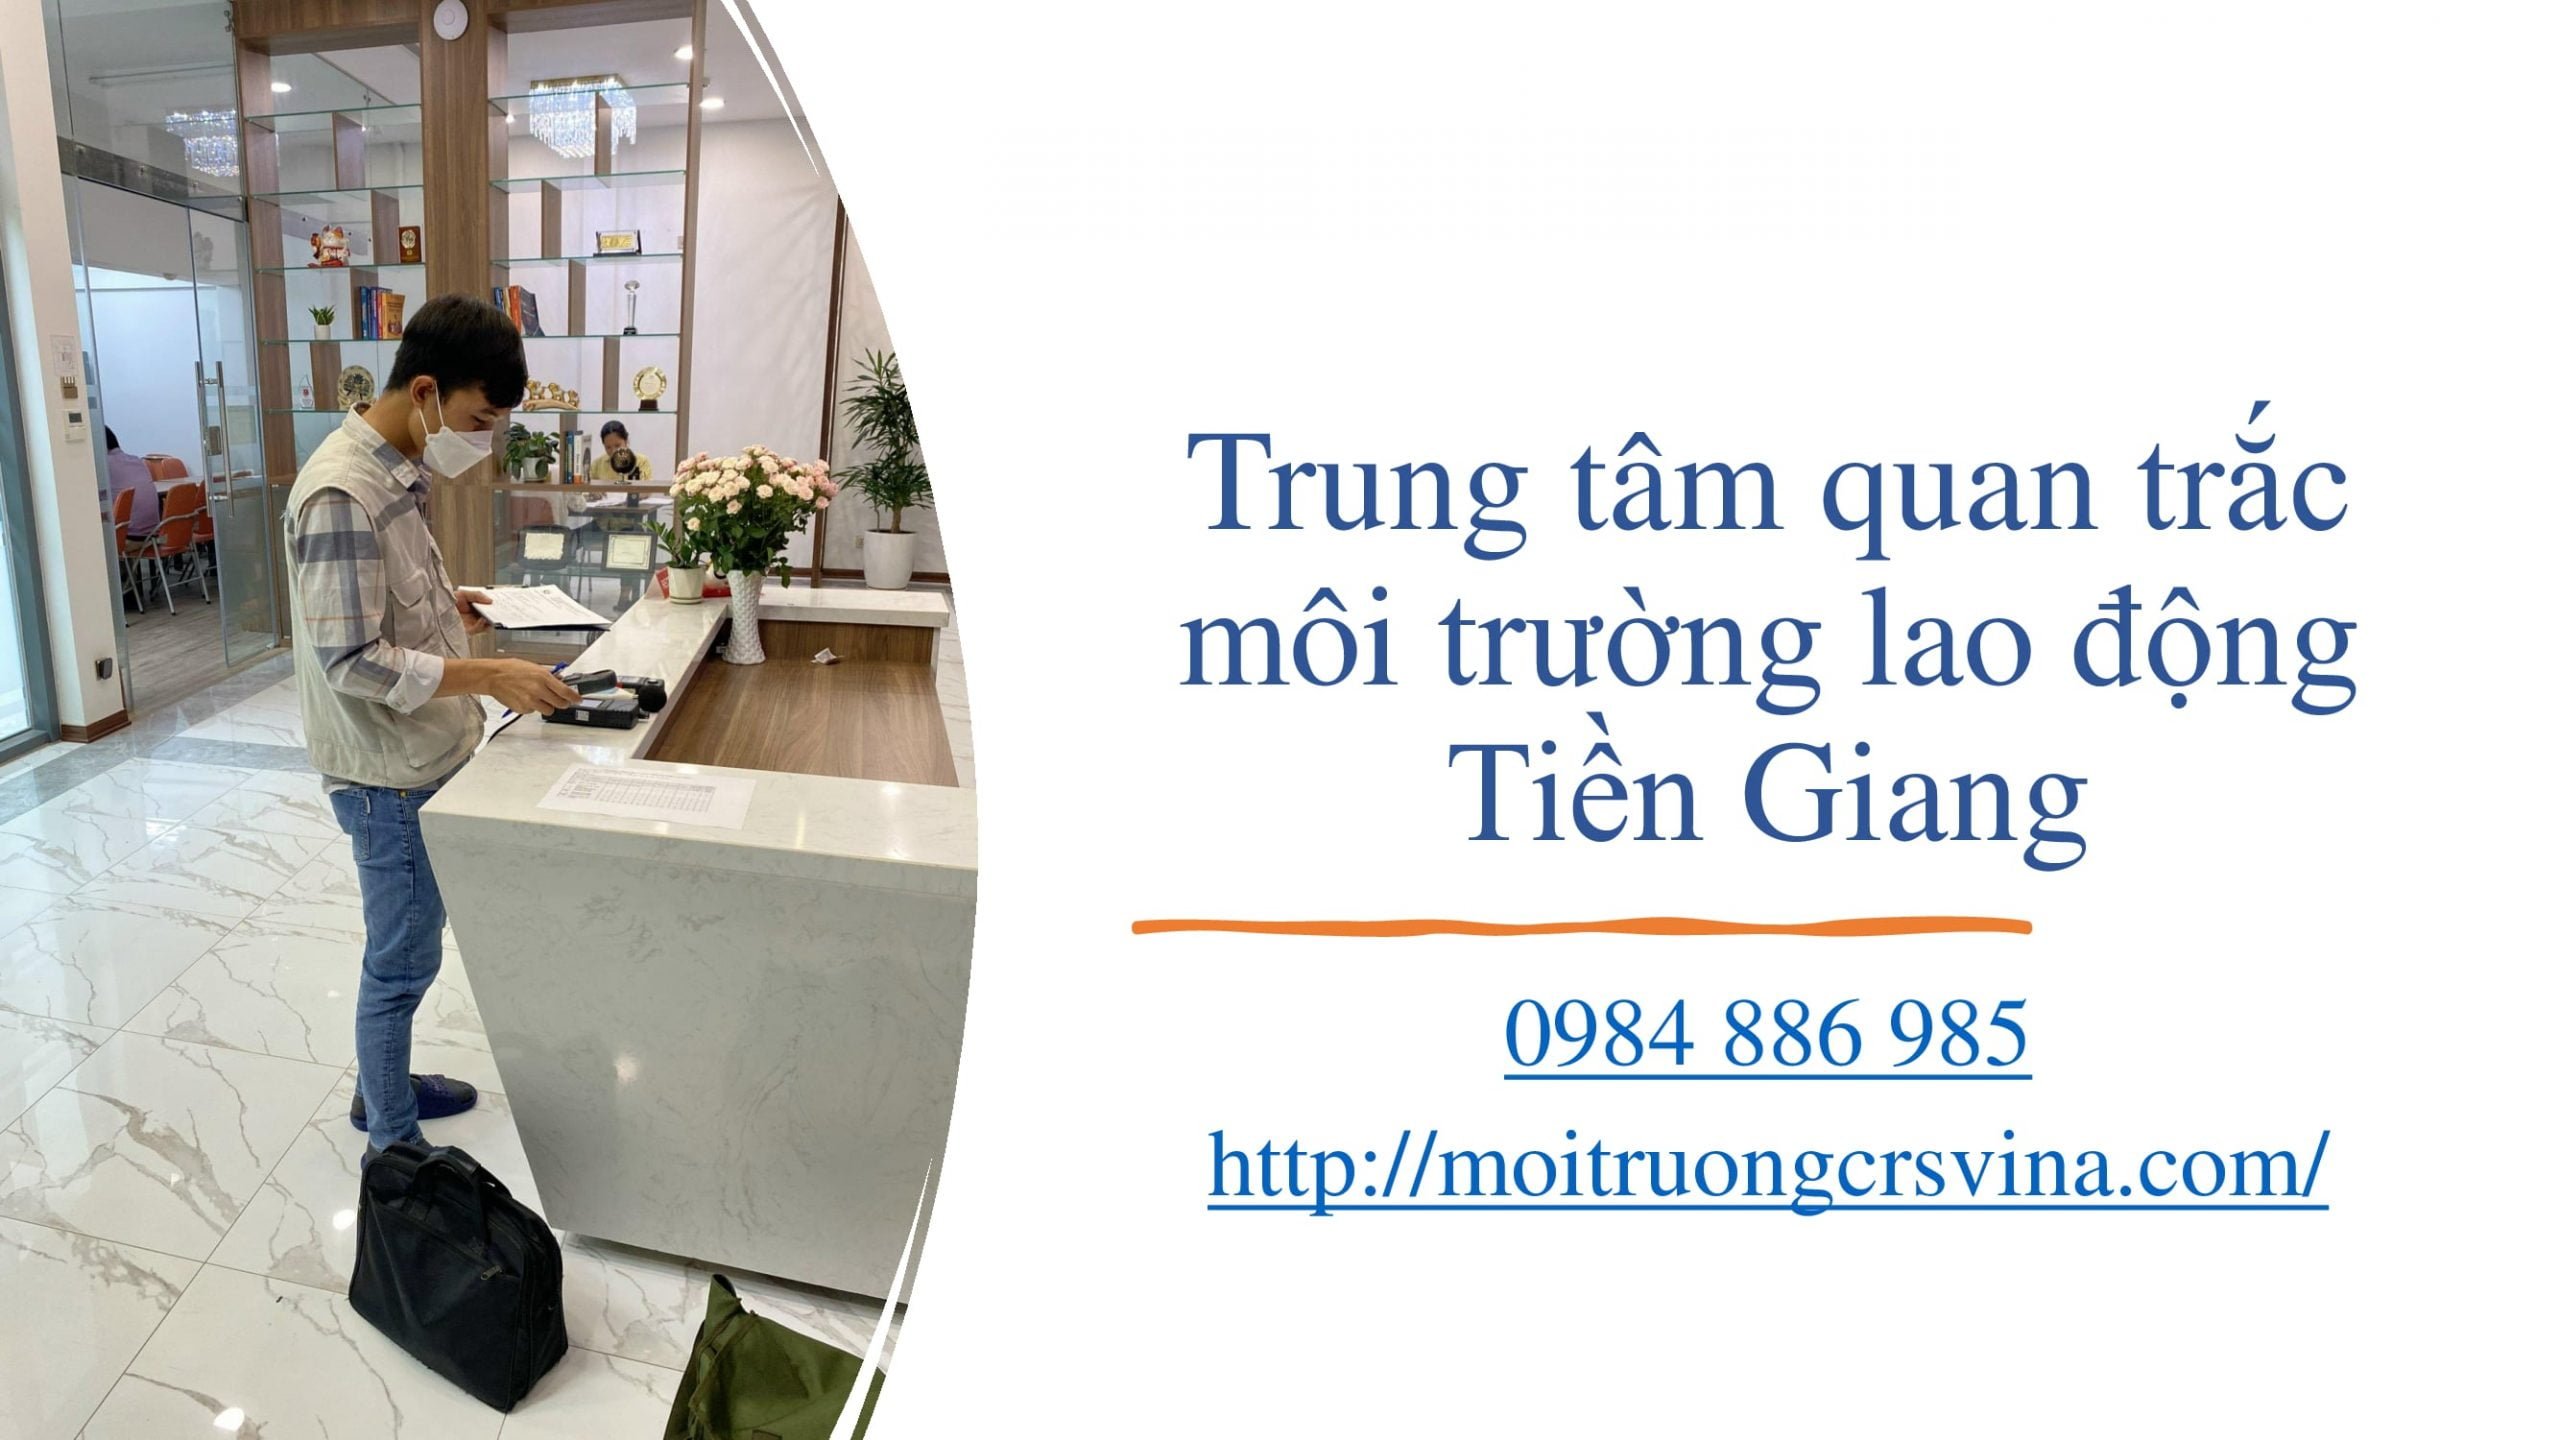 Trung tam quan trac moi truong lao dong tien giang scaled